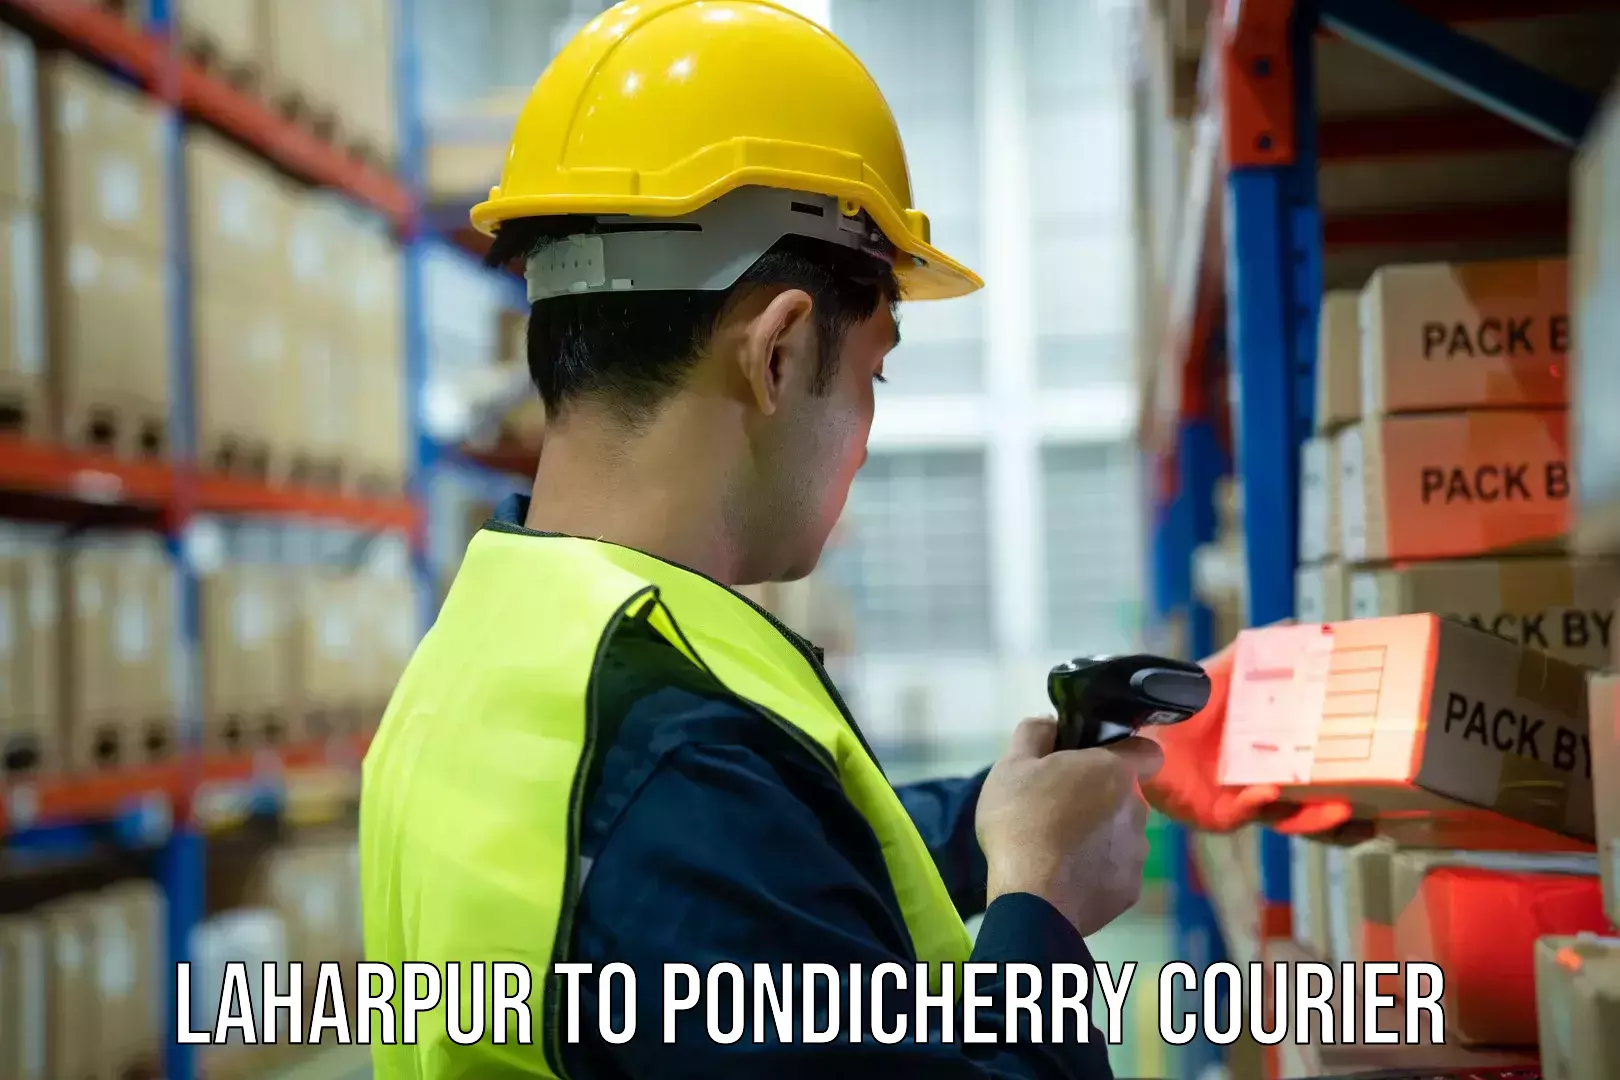 Nationwide shipping services Laharpur to Pondicherry